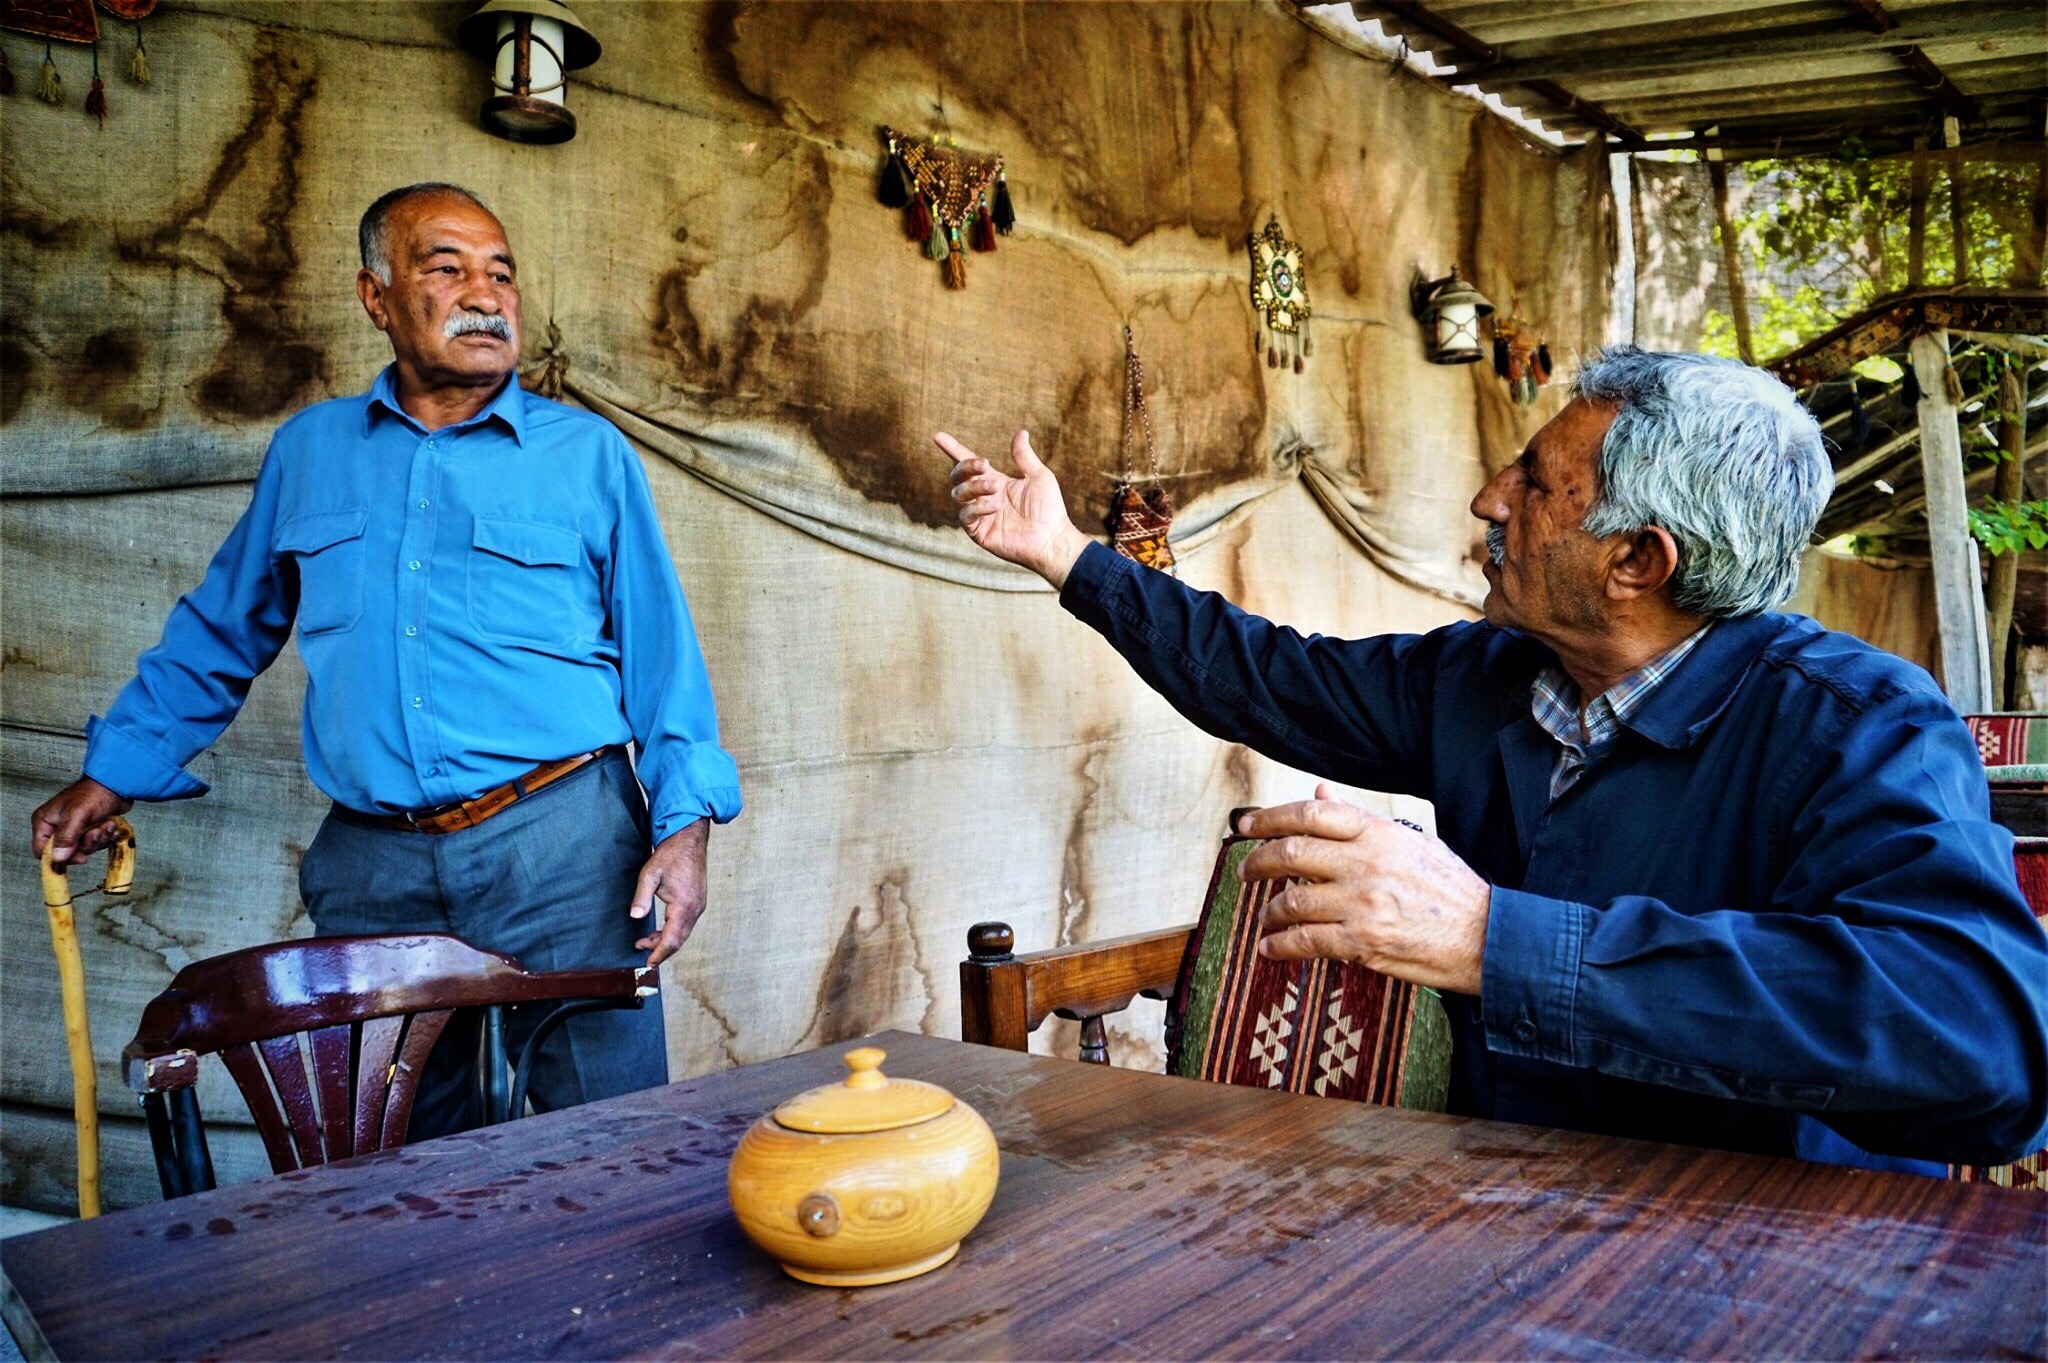 Sait Kalaygil and Mehmet Basak get into a heated argument over who should be given house ownership in New Hasankeyf. May 16, 2019. (Nimet KIRAC/ MEE)